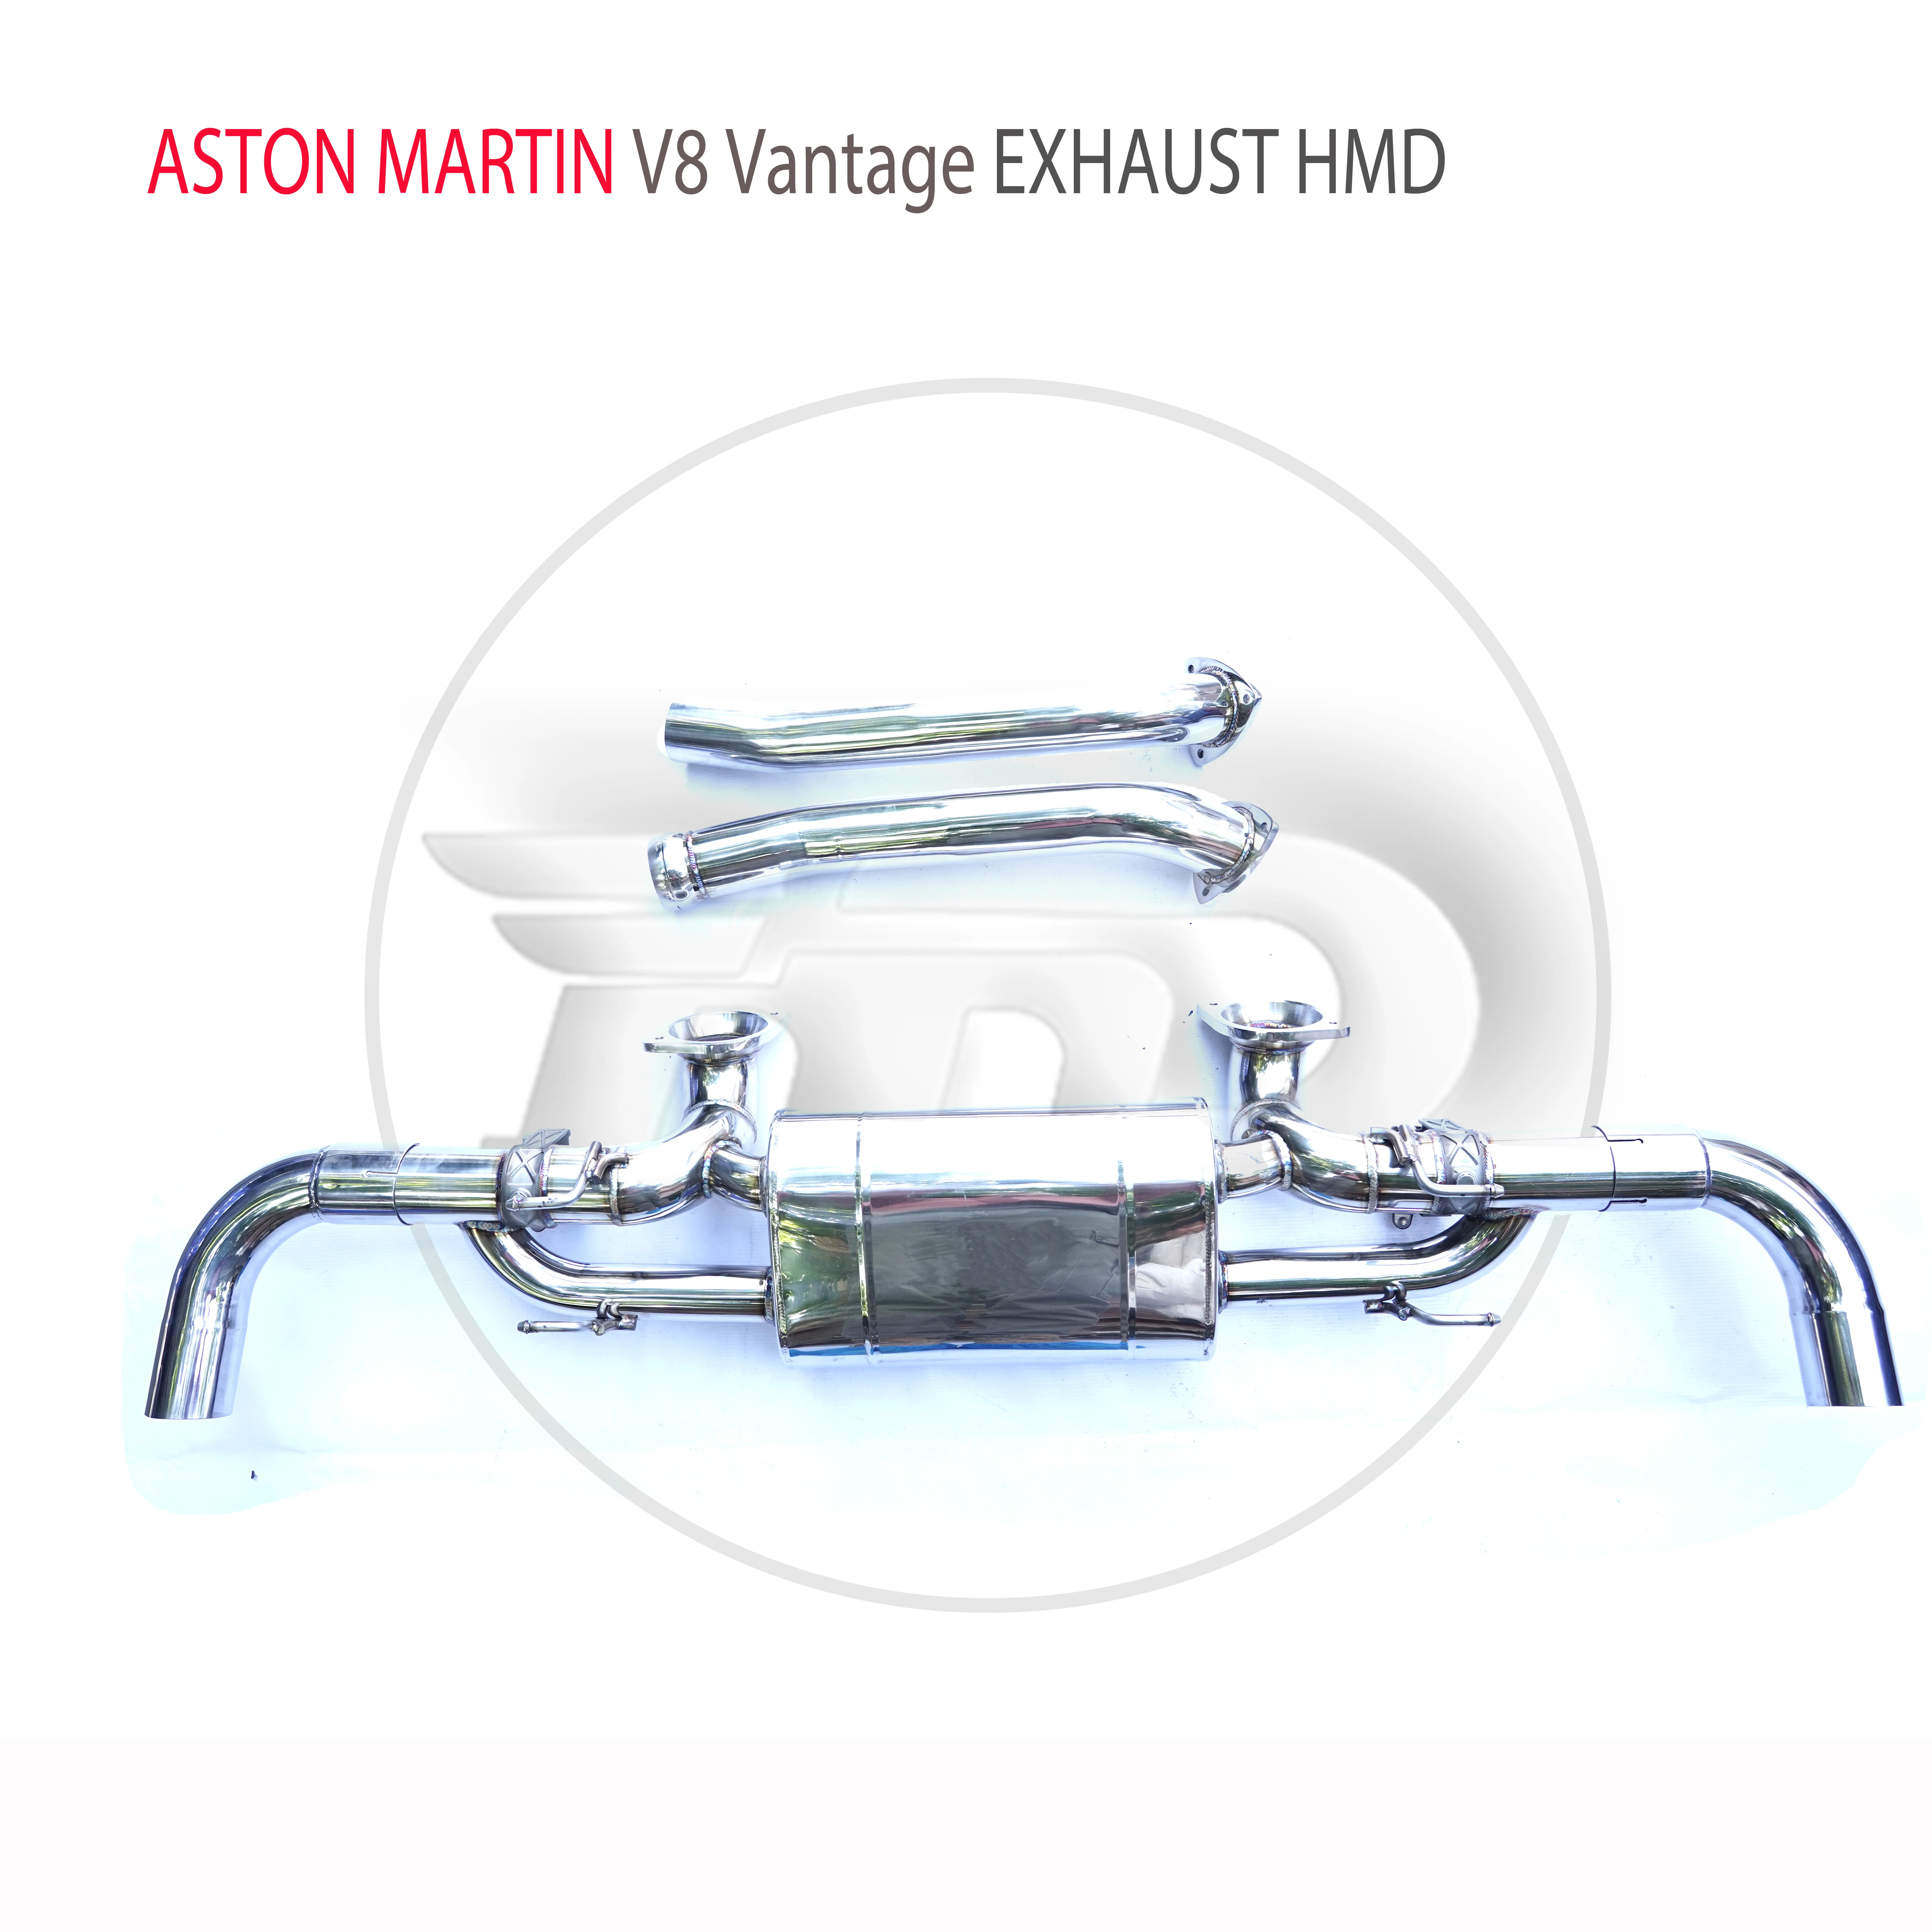 

HMD Stainless Steel Exhaust System Manifold is Suitable for Aston Martin V8 Vantage Auto Modification Valve Muffler For Car